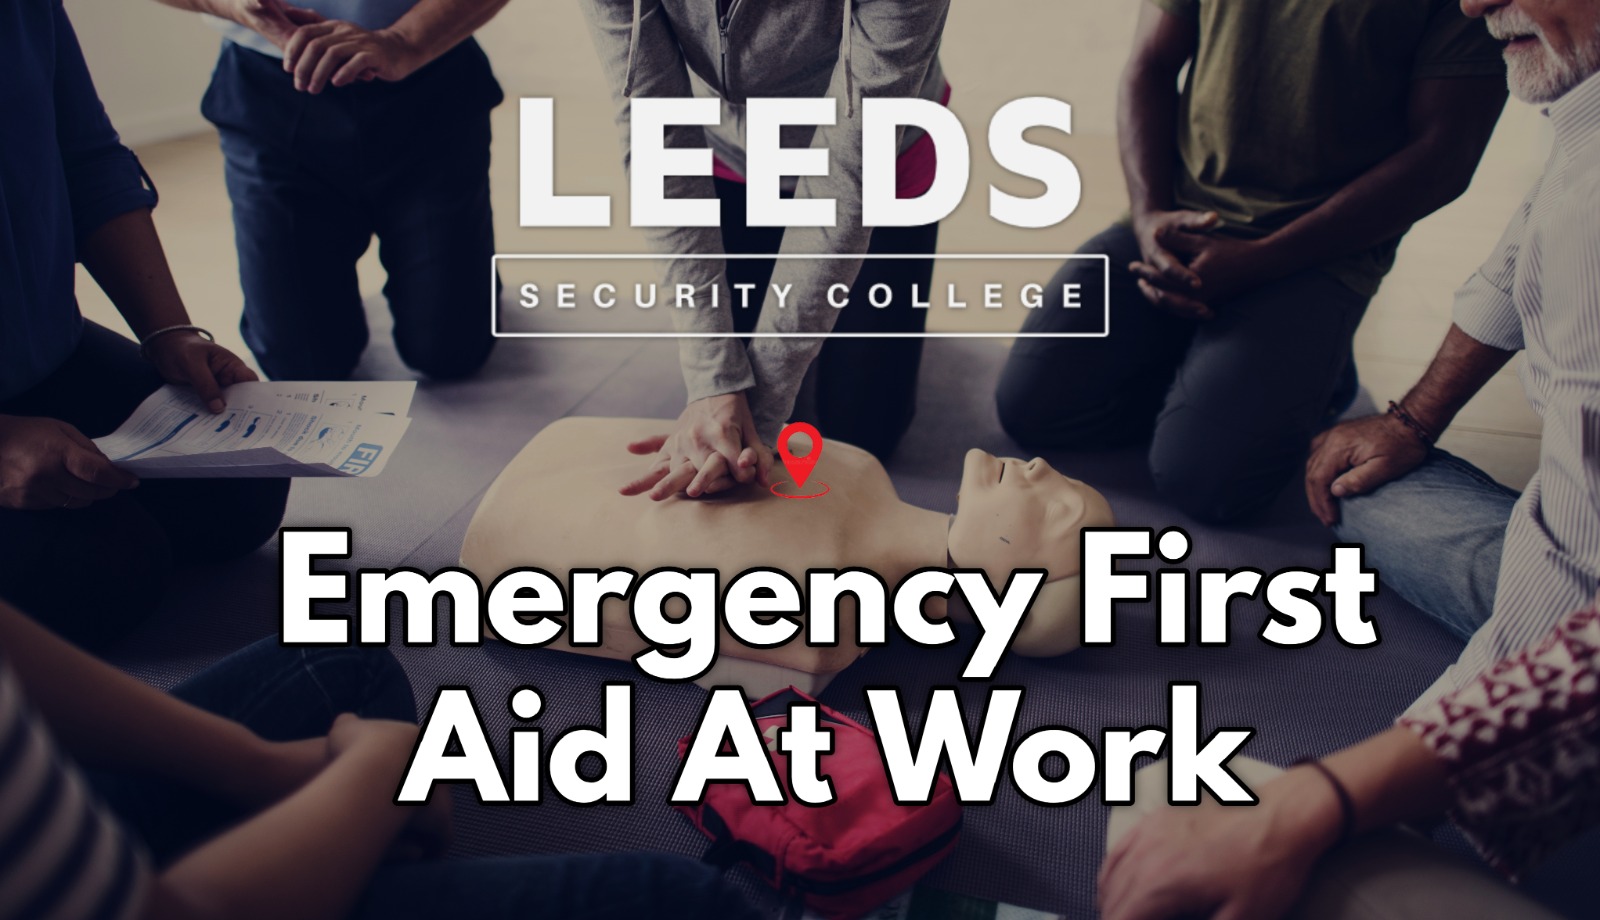 Emergency first aid at work leeds security college